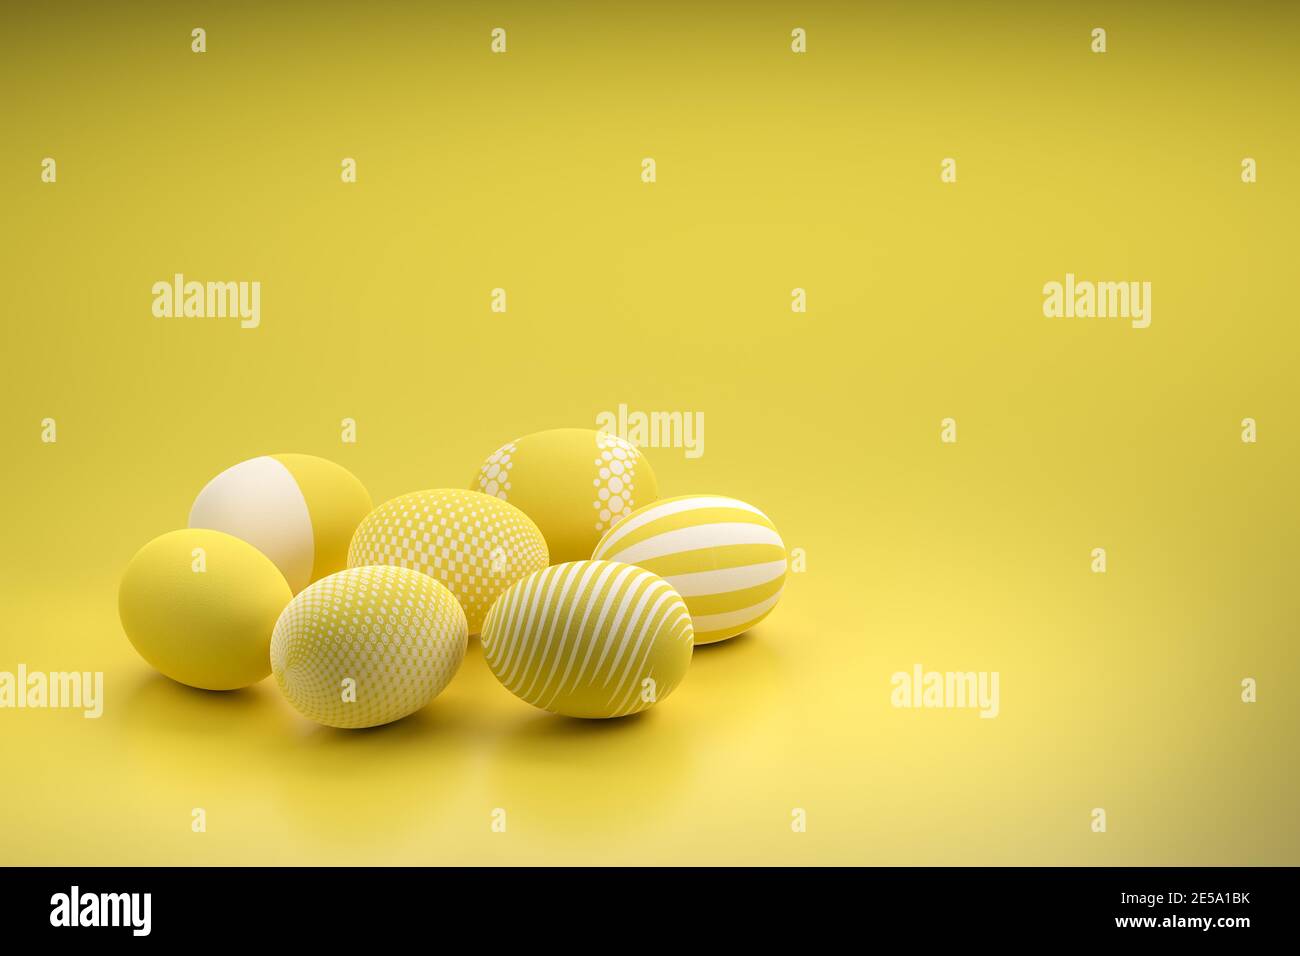 Easter Eggs with different textures in illuminated yellow color of the year on a seamless background Stock Photo